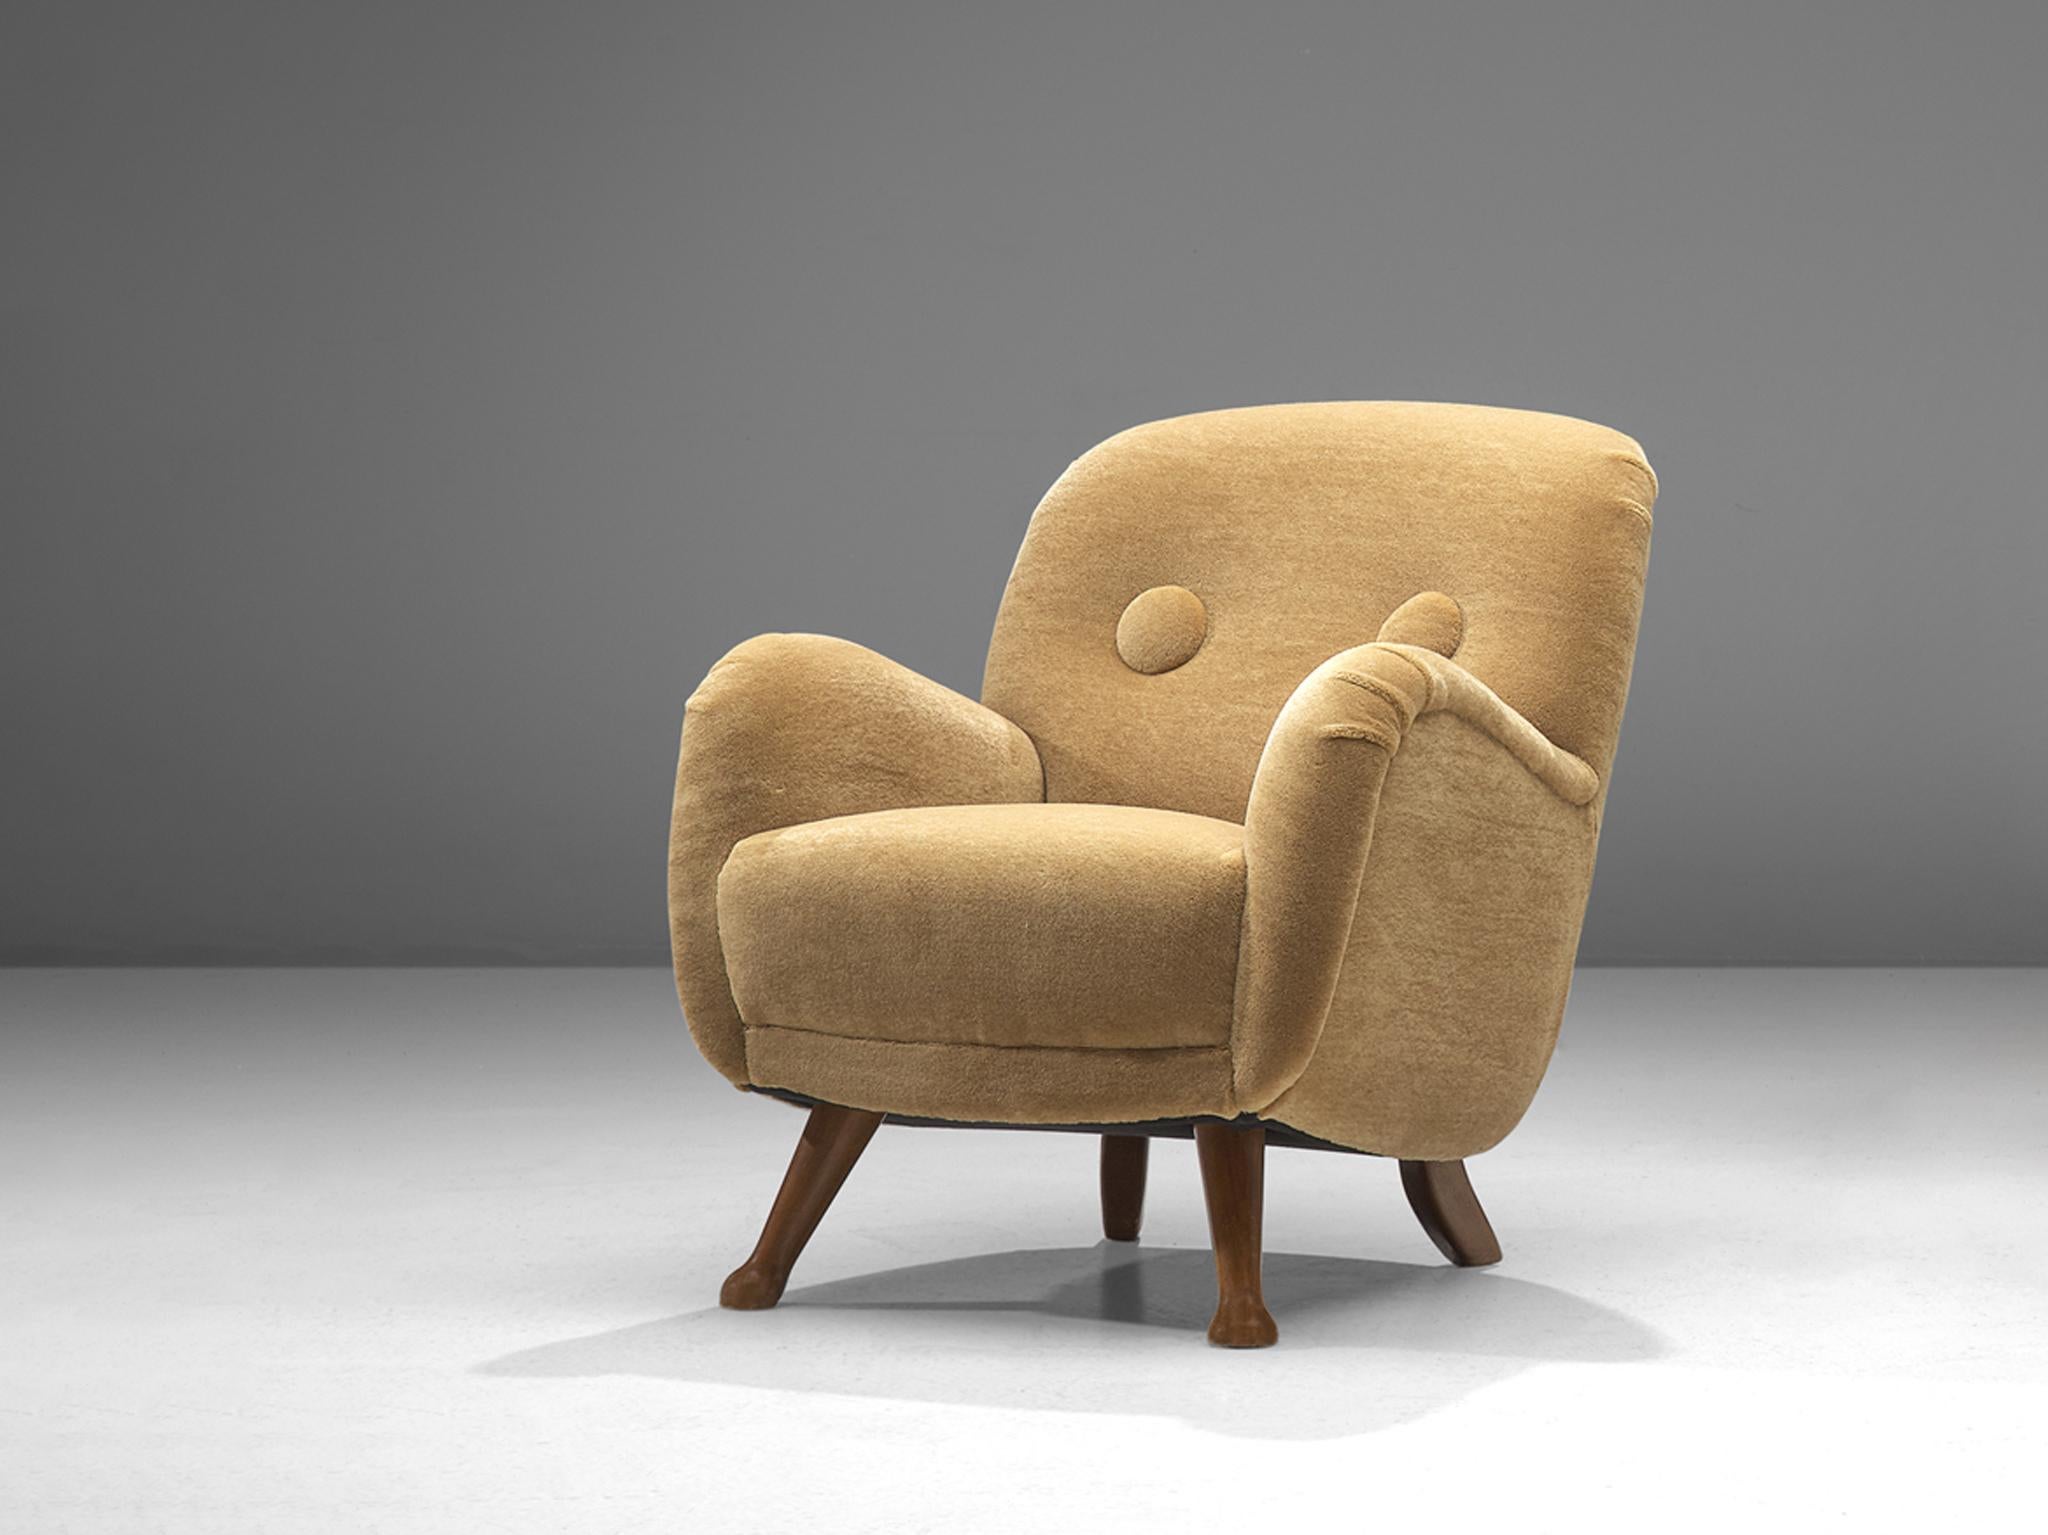 Armchair by Berga Mobler, beige Mohair and oak, Scandinavia, 1940s.

This round and curvy armchair is a very comfortable and strong singular item. The whole shell is slightly tilted backwards. The shell rests on four small oak legs that bend